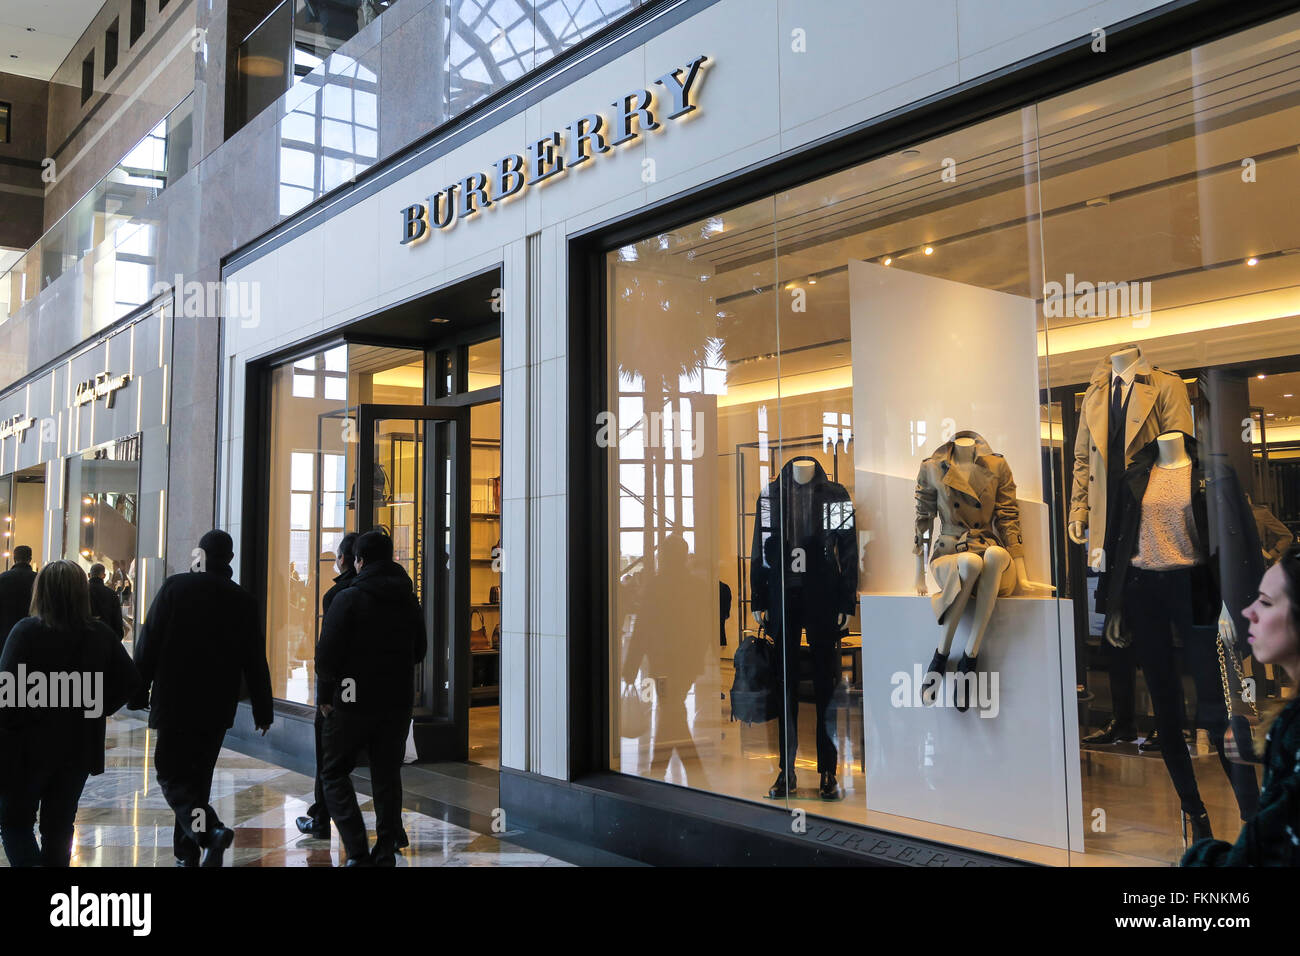 burberry sale outlet